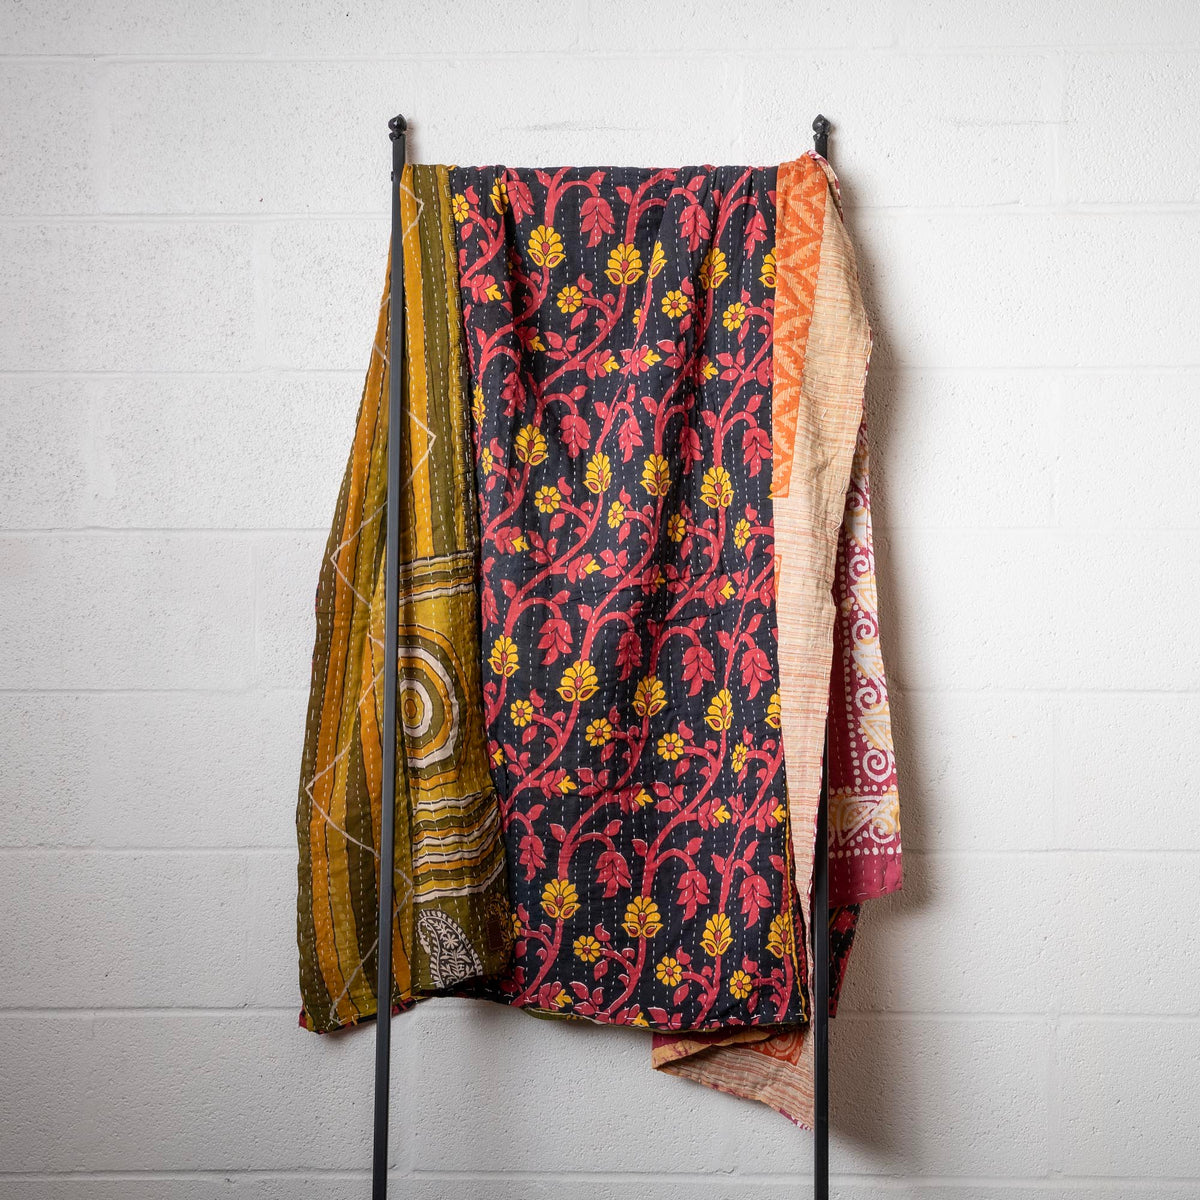 Kantha India Blanket One-of-a-Kind Handcrafted Quilted Pattern Throw ~ No. K-00506